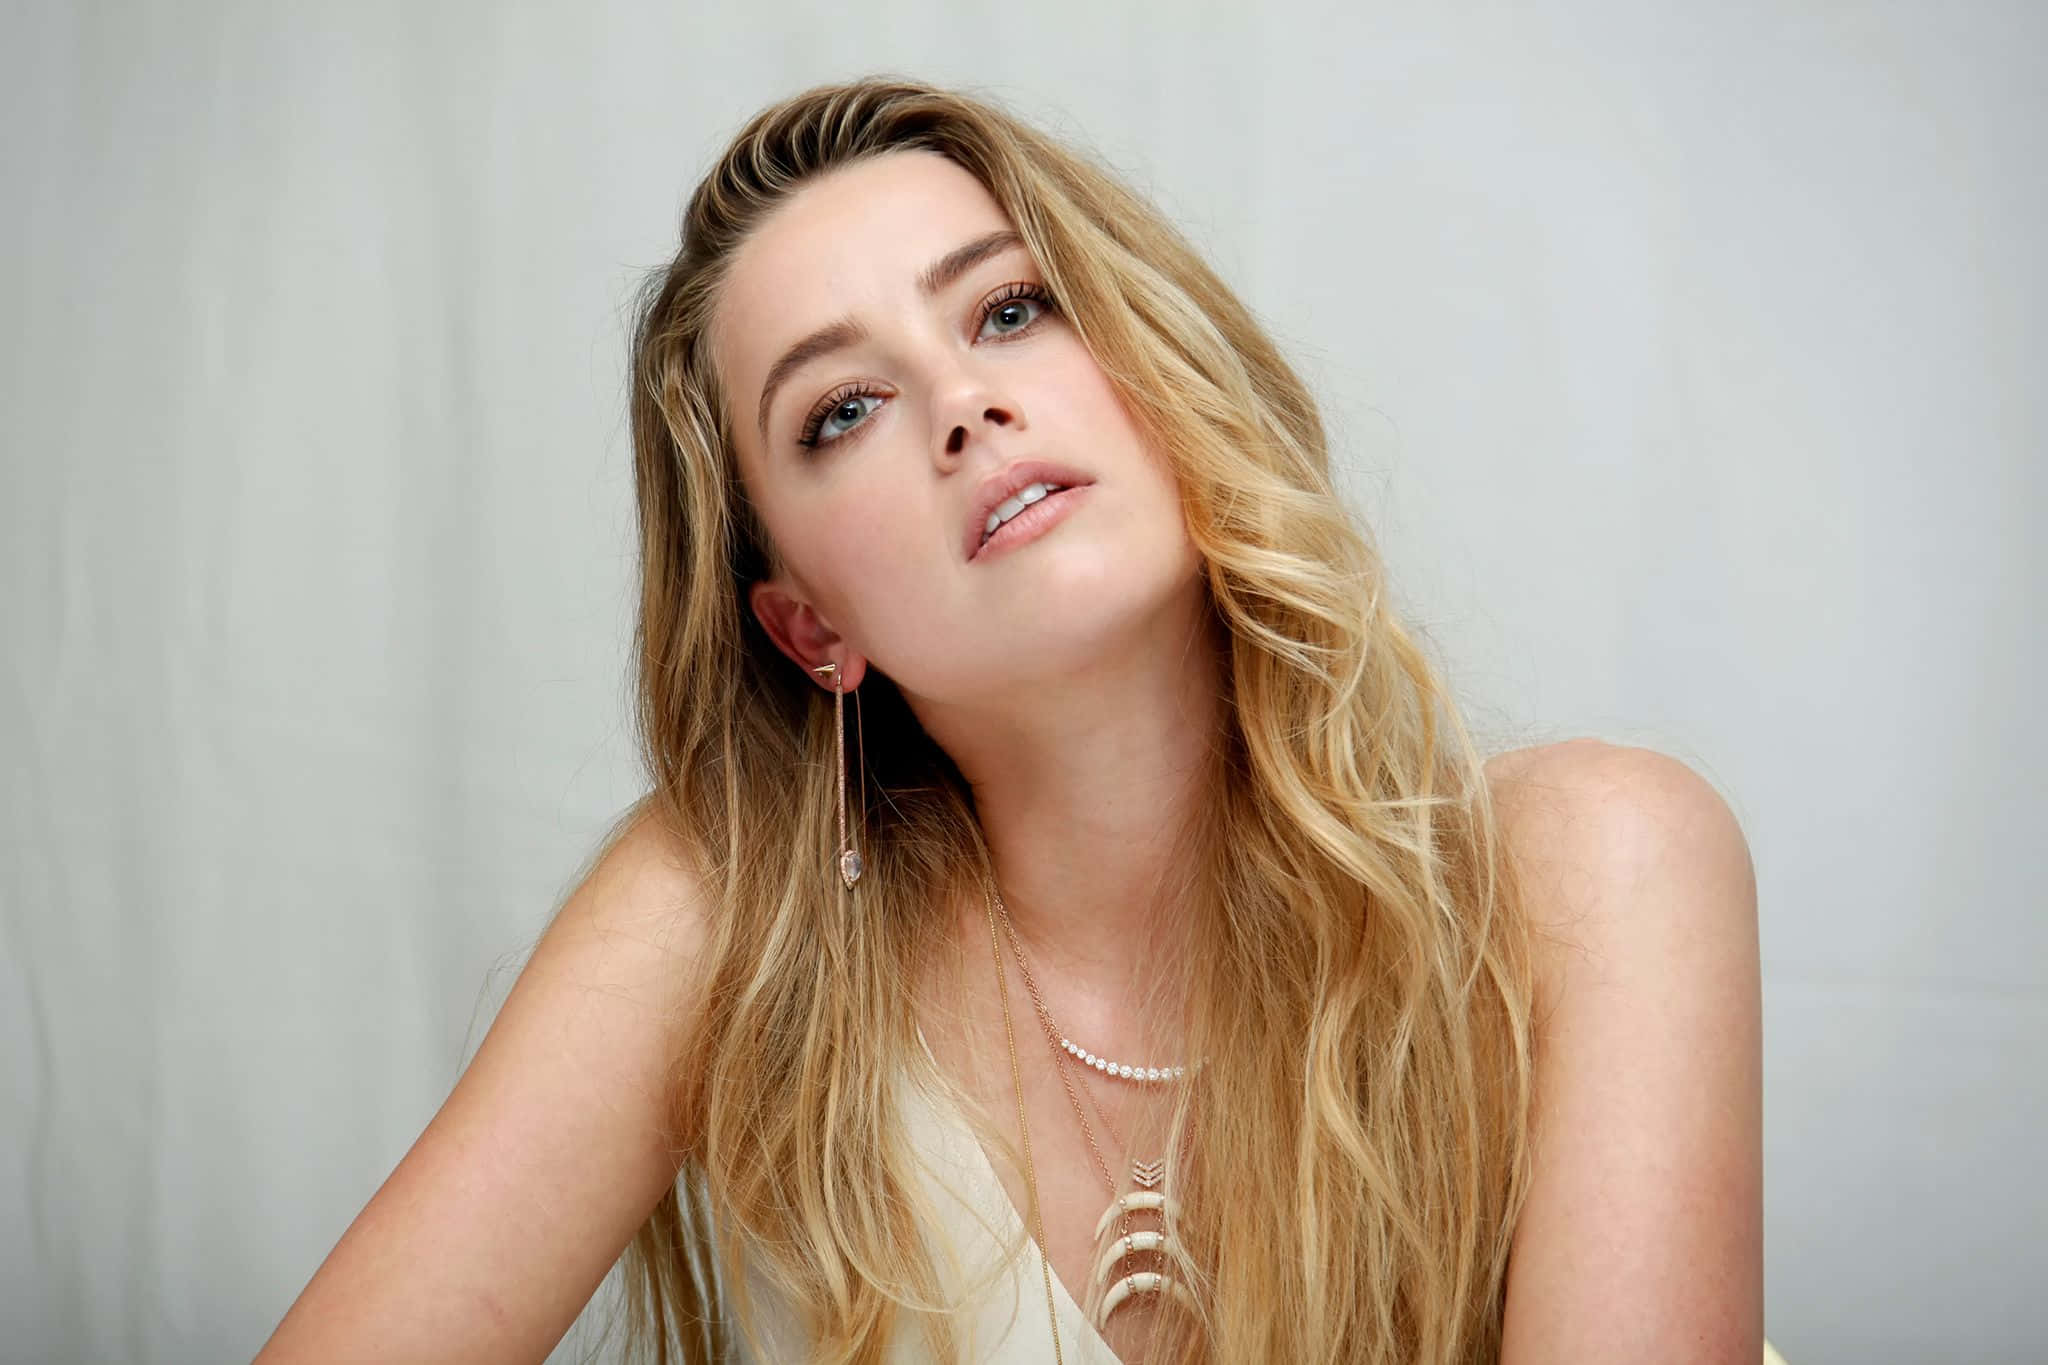 Hollywood Actress Amber Heard glittering in a photo shoot.